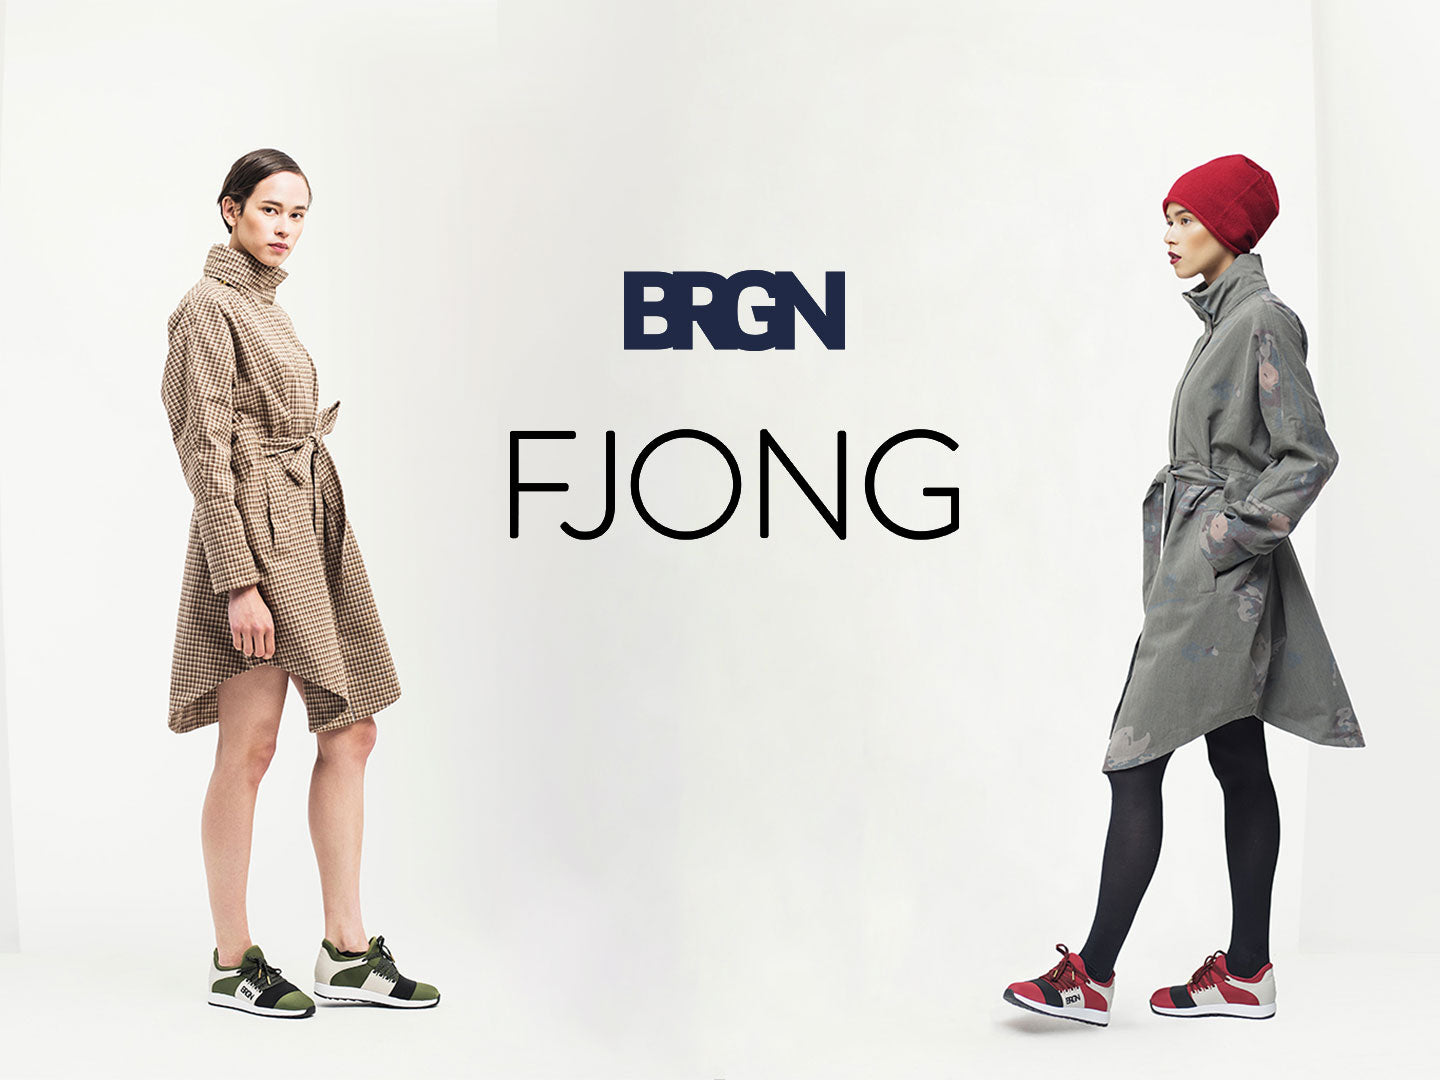 BRGN rentals on Fjong